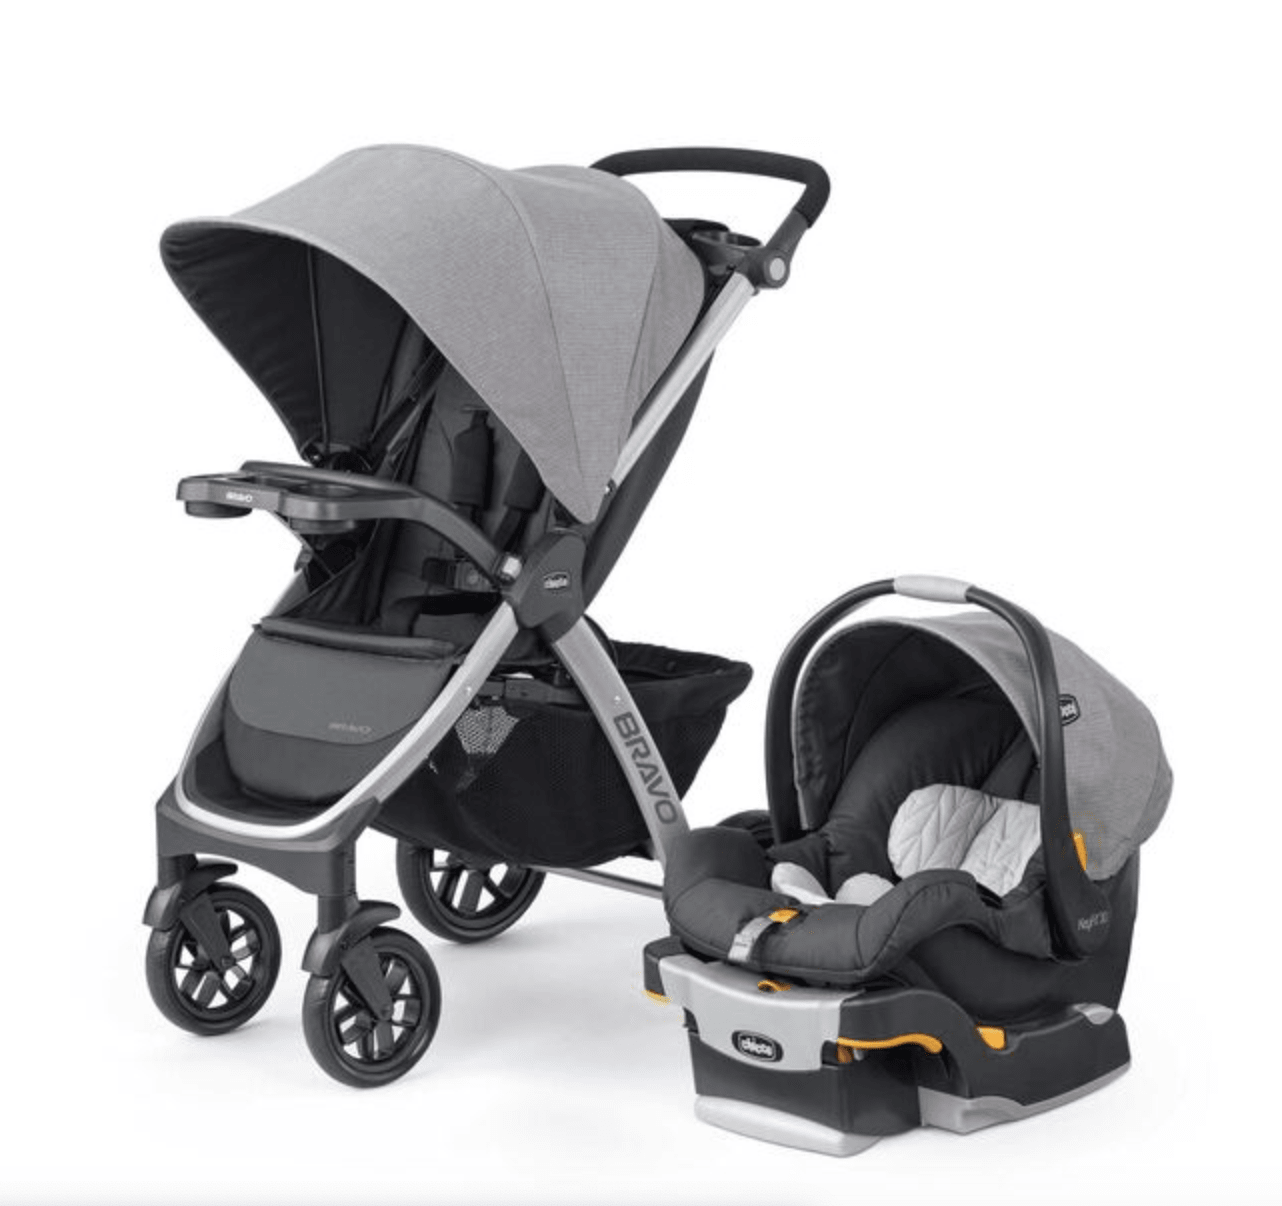 12 Best Strollers Of 2021 Chicco Nuna Doona And More - Best Baby Car Seat Stroller 2020